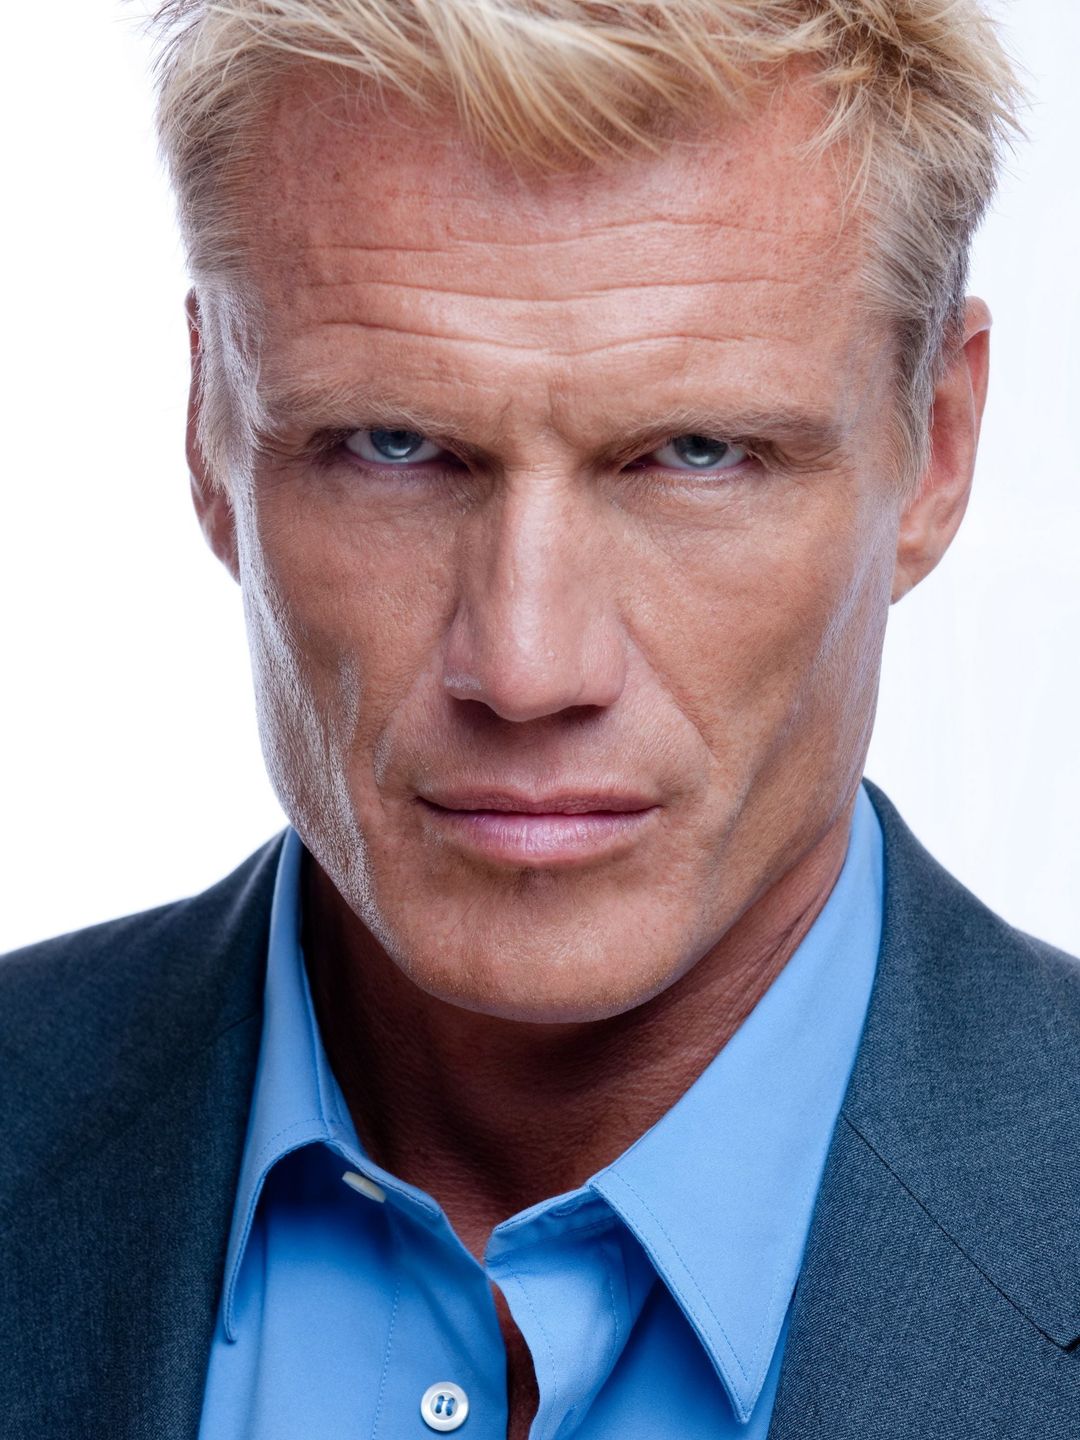 Dolph Lundgren where is he now